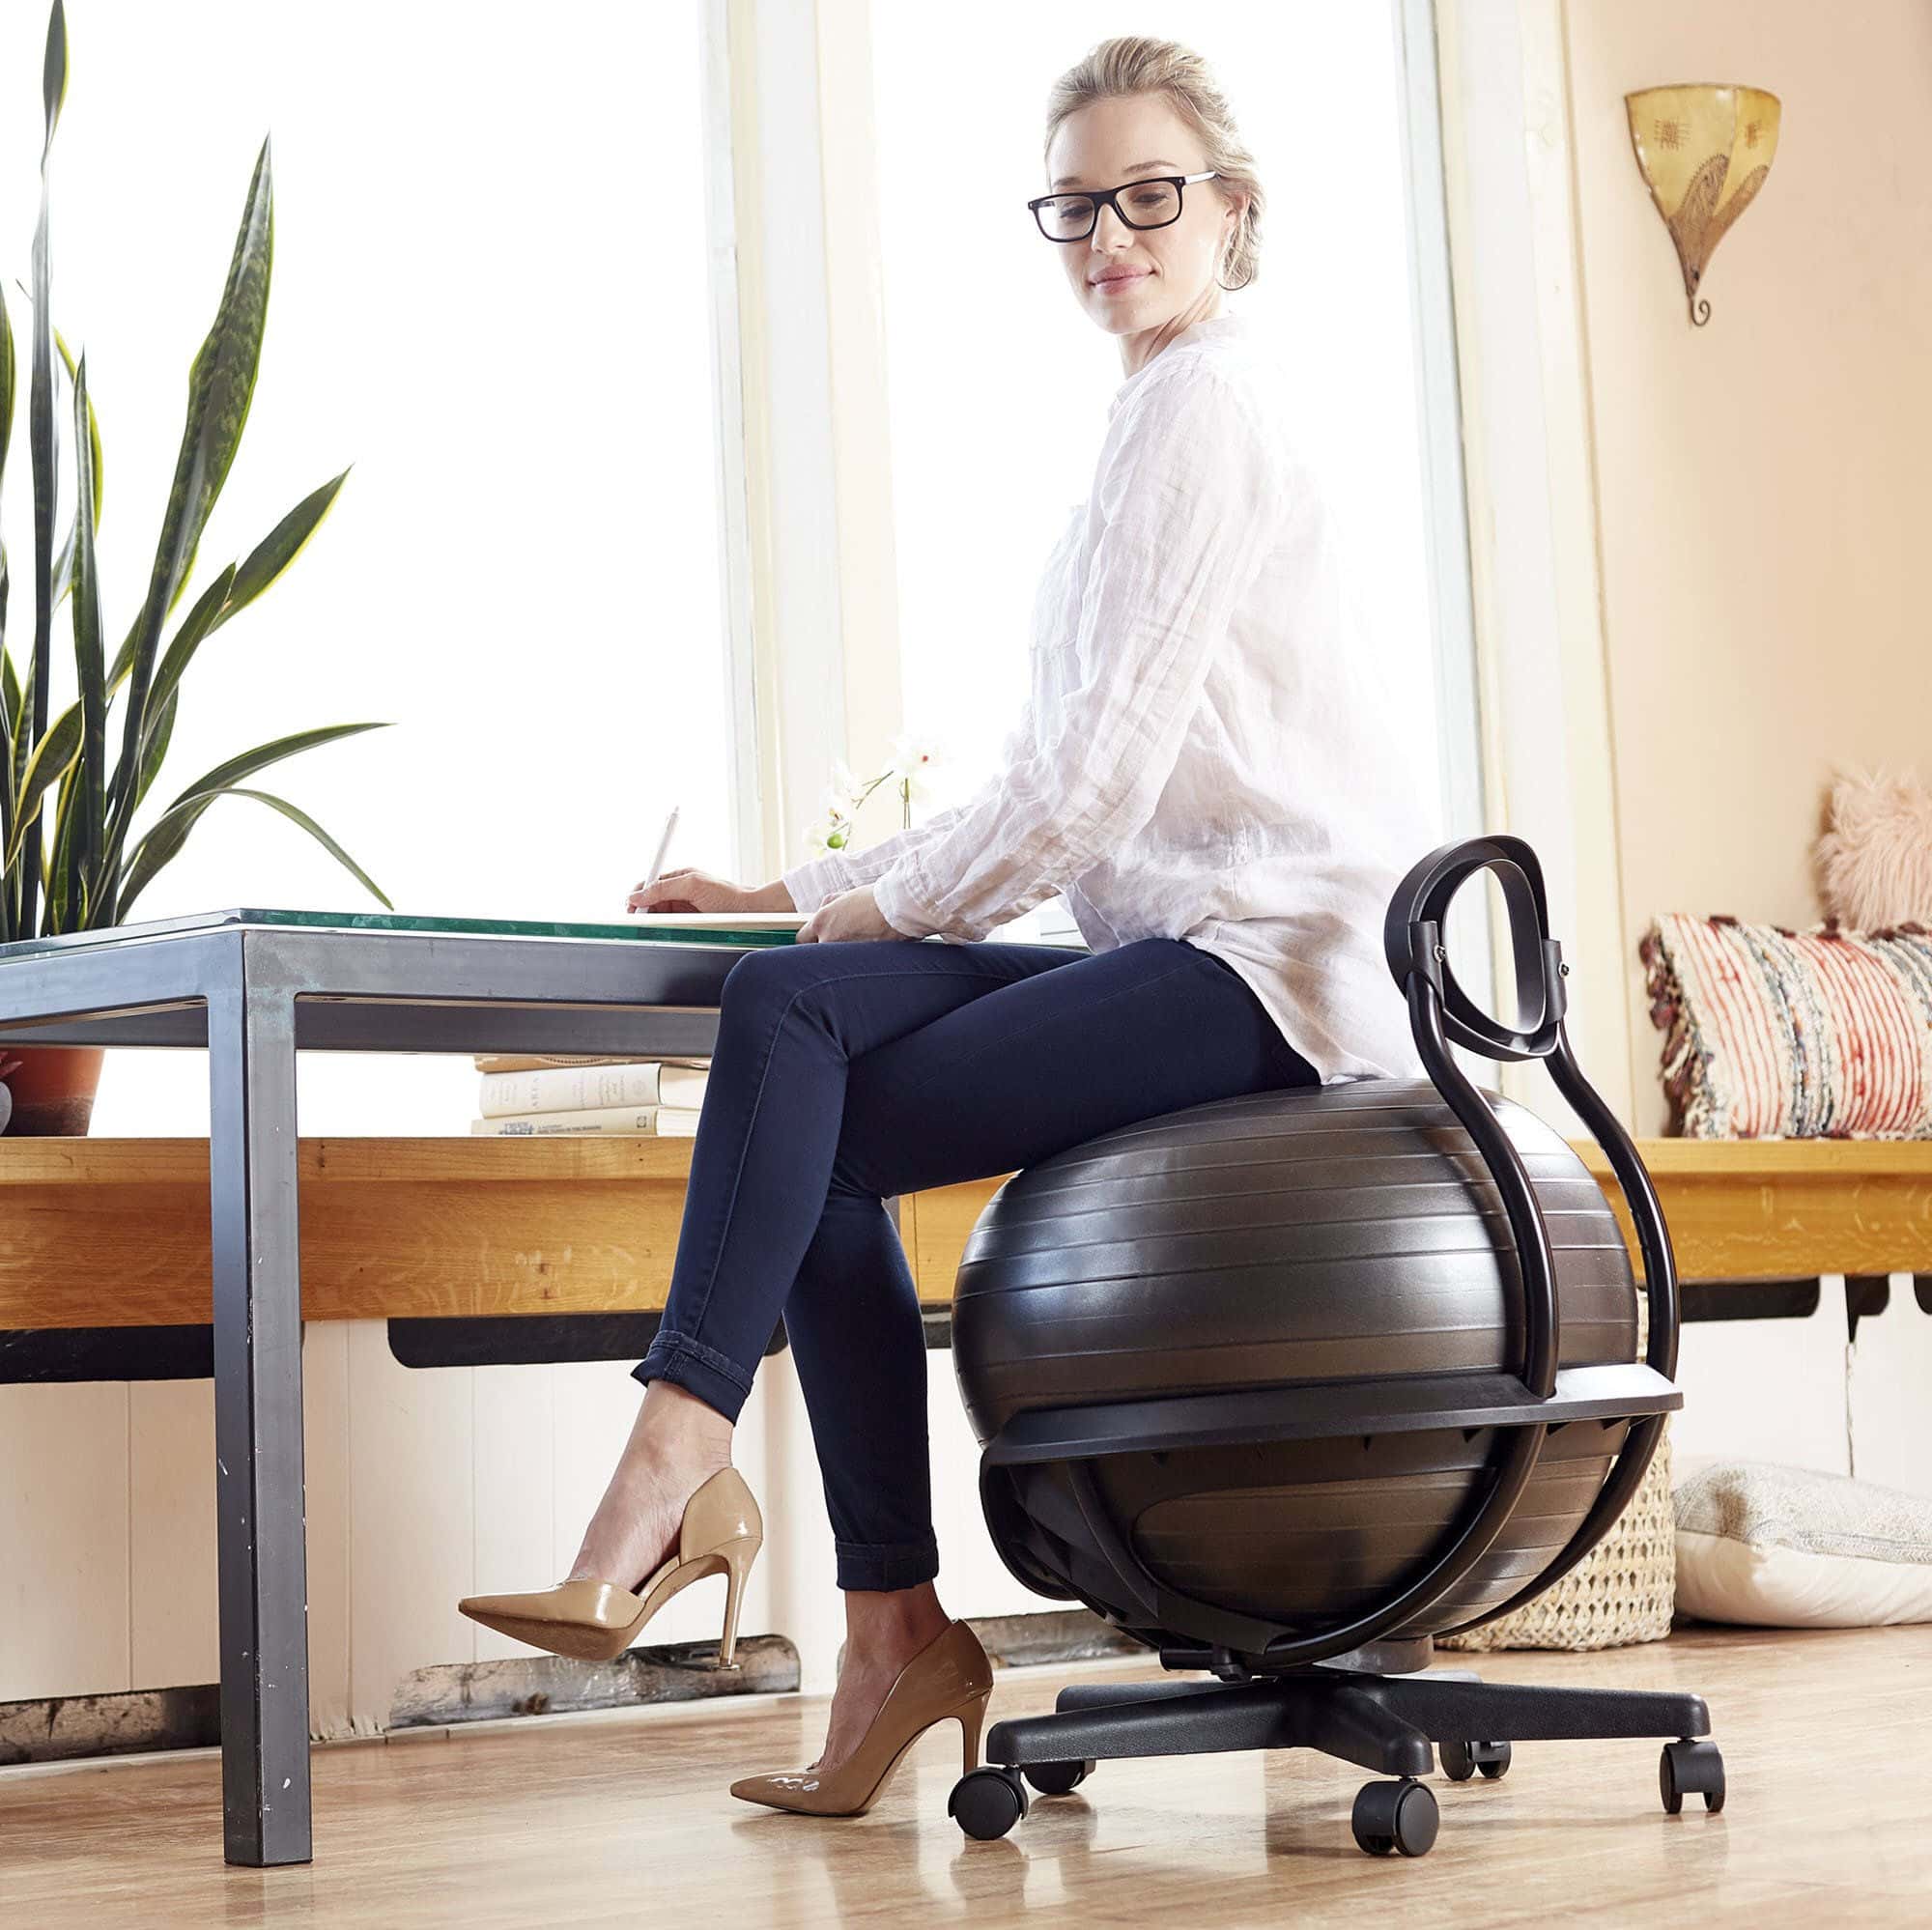 Gear Review: Gaiam Ultimate Balance Ball Chair